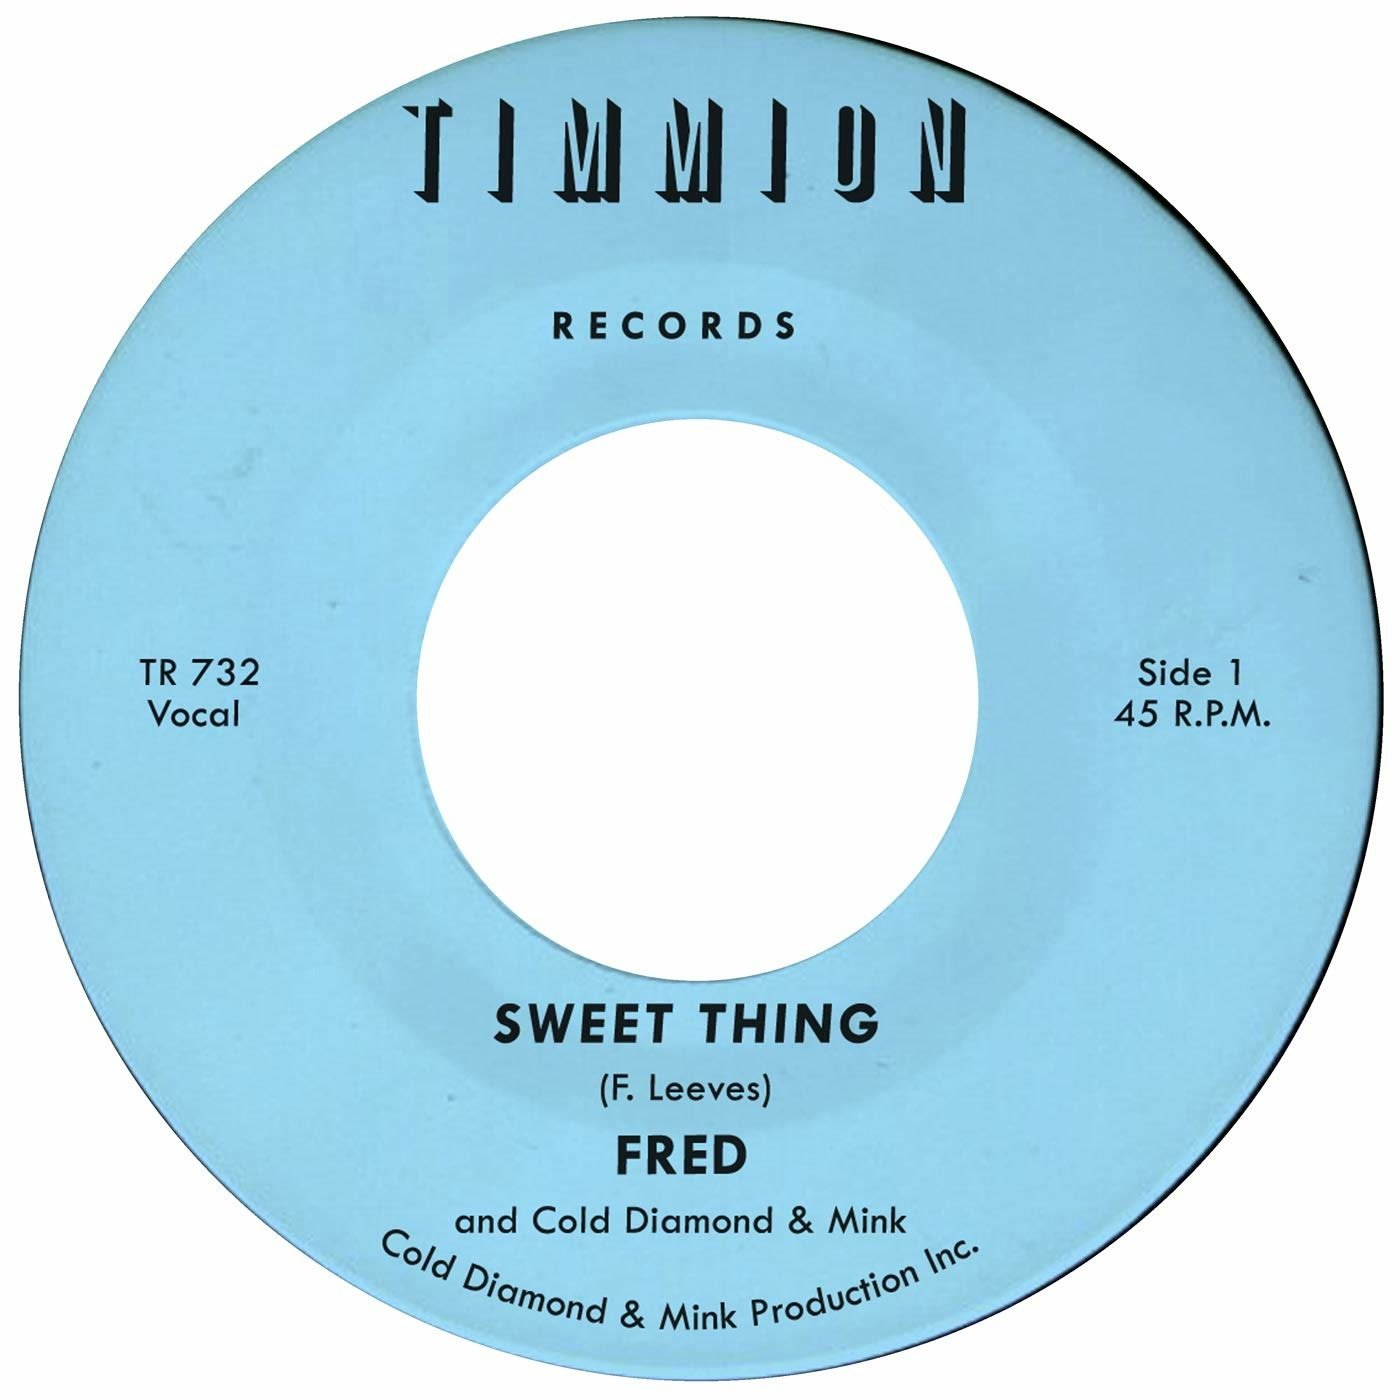 CD Shop - FRED SWEET THING